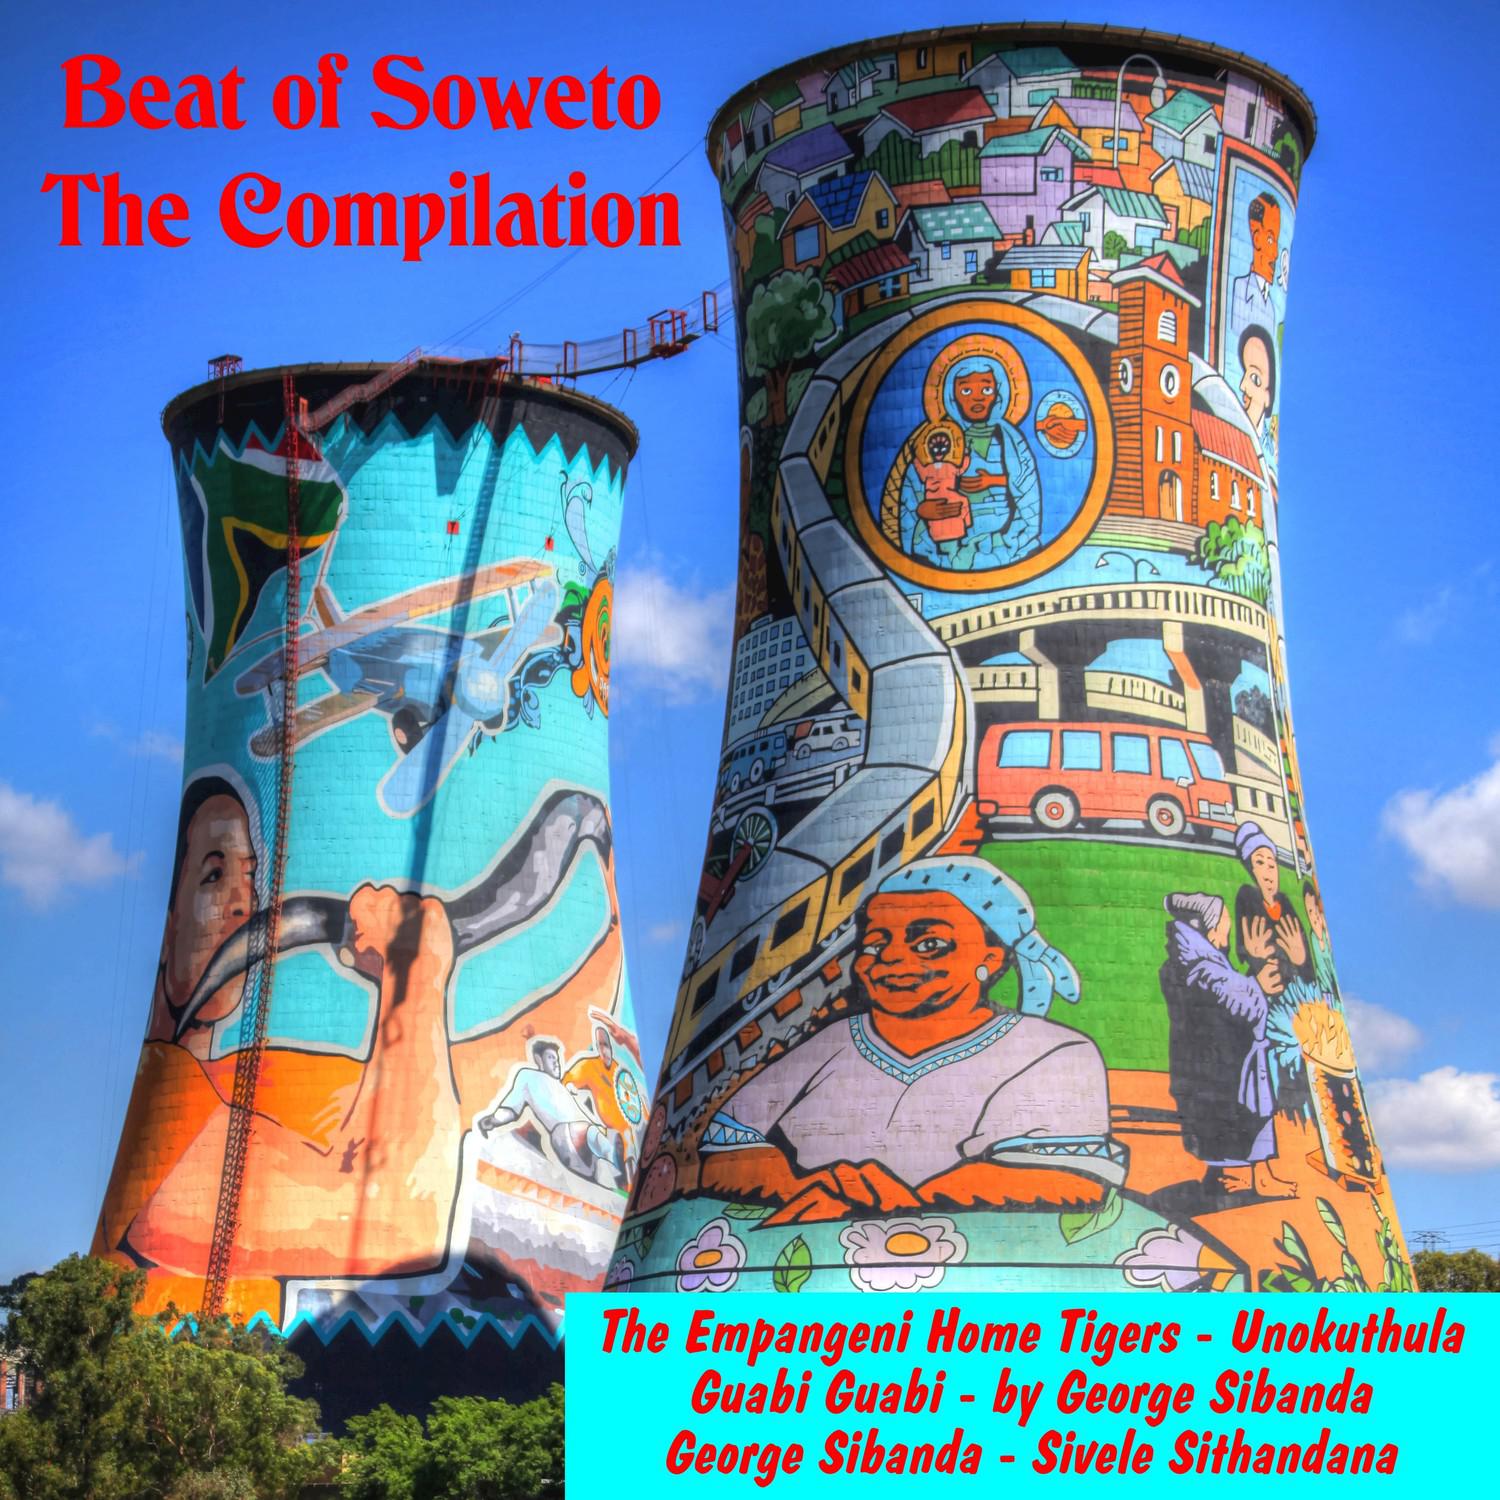 Beat of Soweto, the Compilation